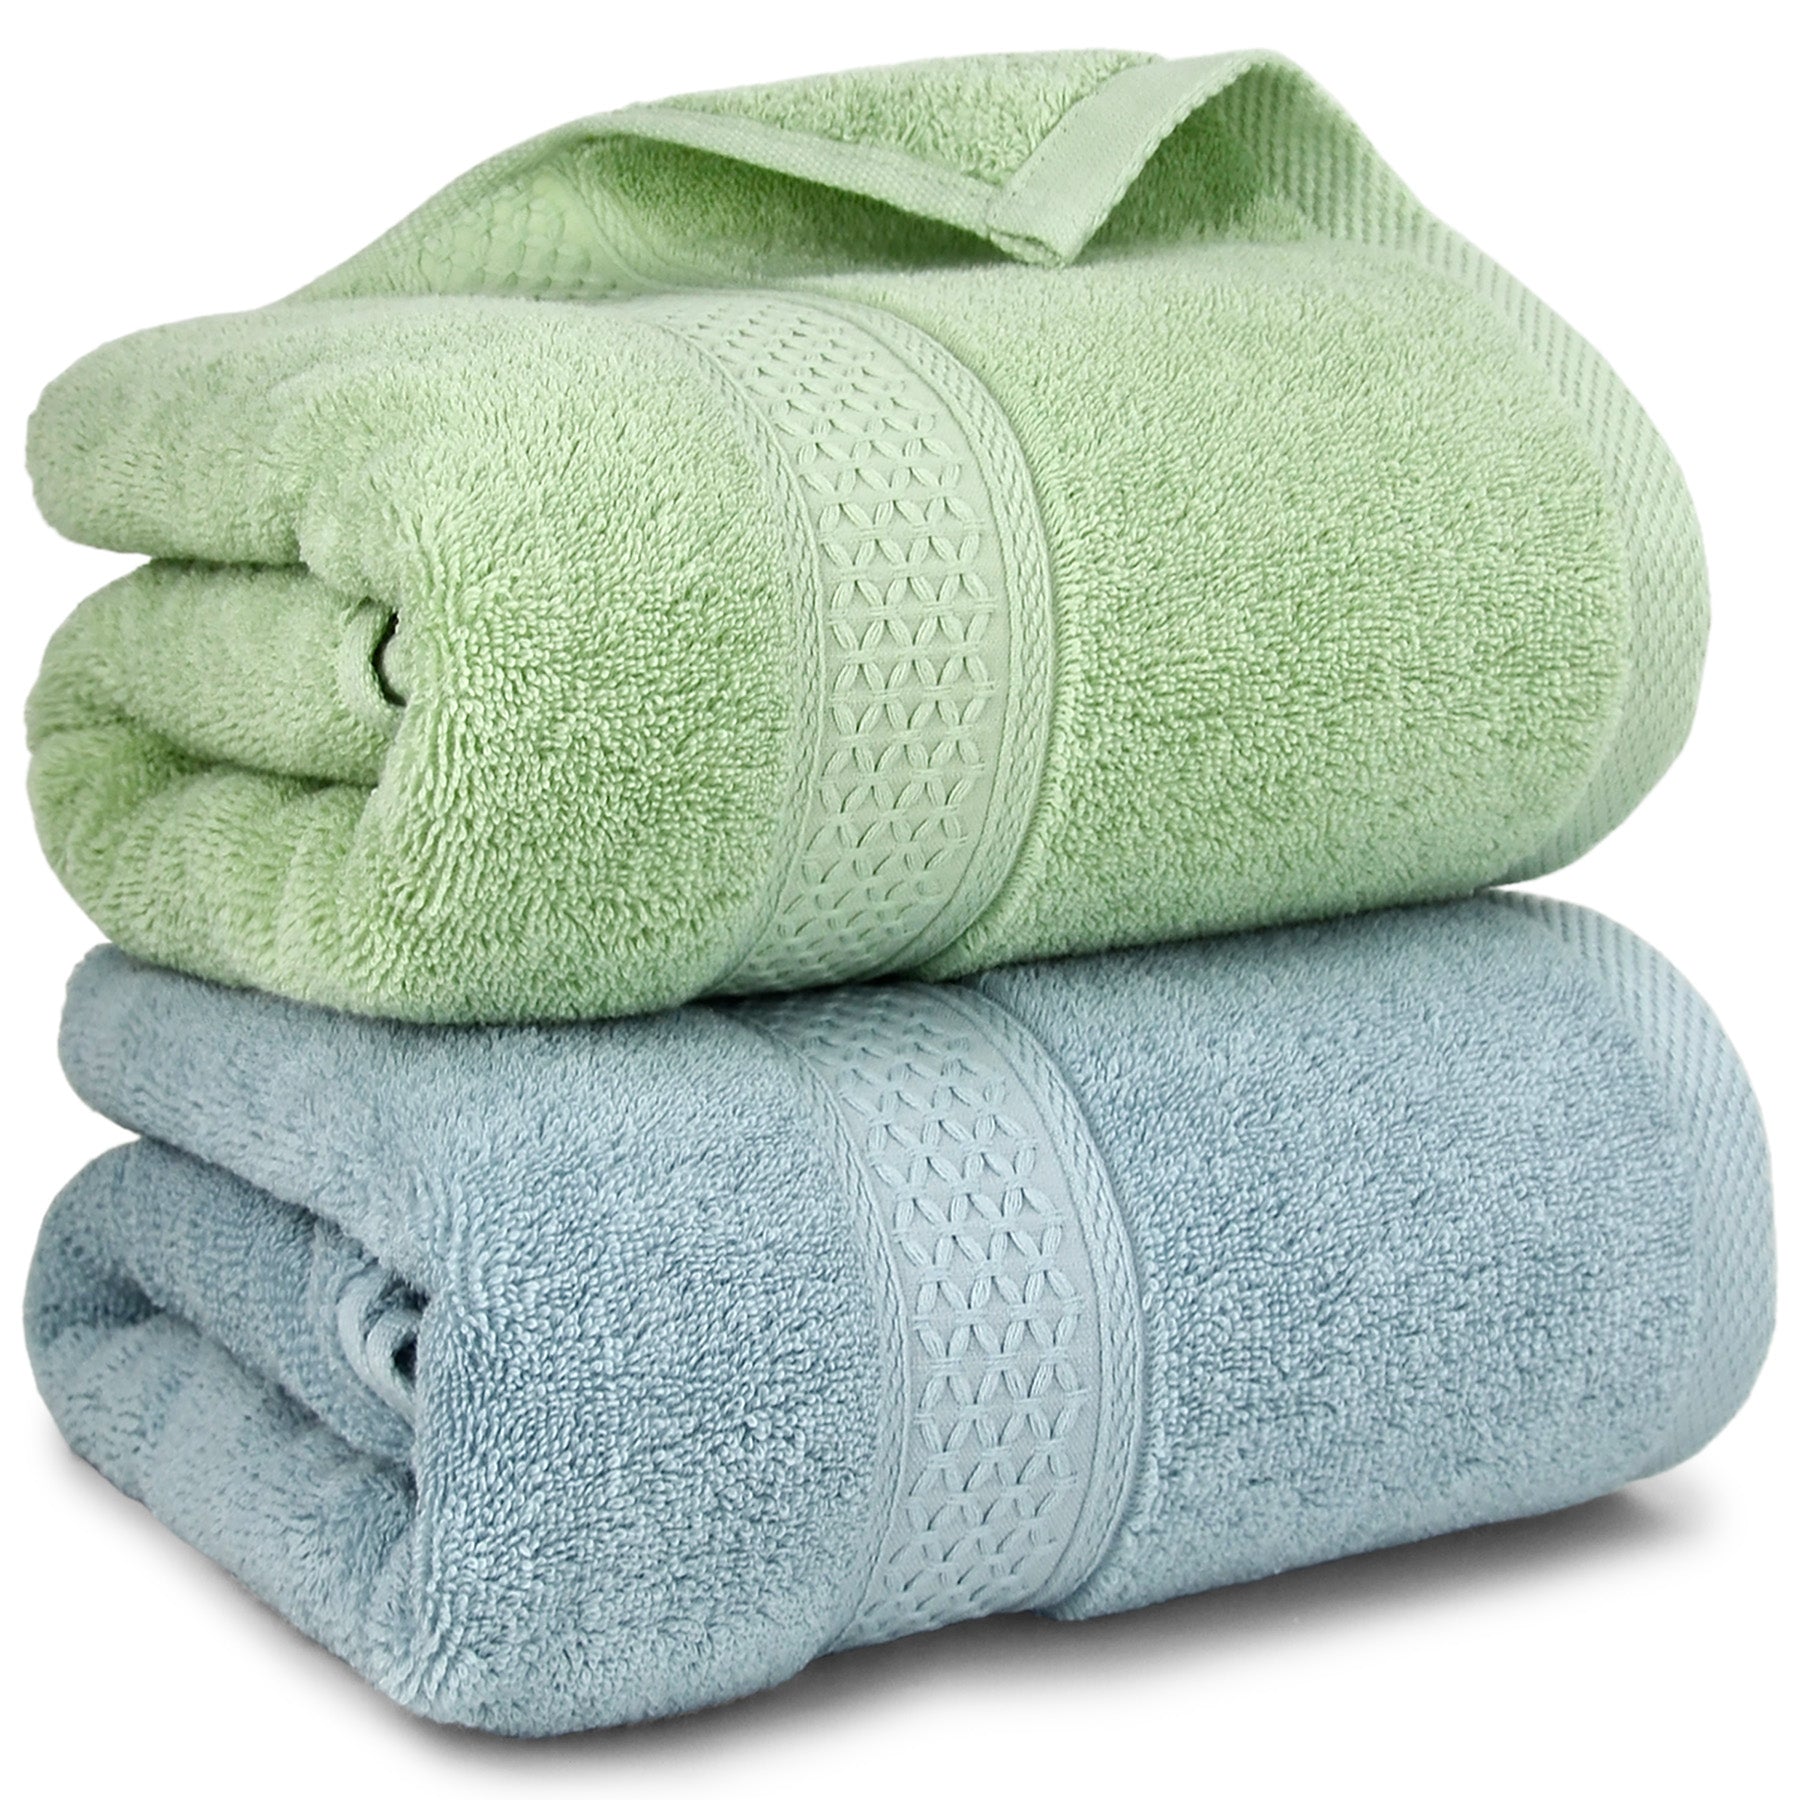 Cleanbear Soft Hand Towels - 100% Cotton Bath Hand Towel Set, Lightweight  for Quick Dry (2 Pack, 13 x 29 Inches) (Pink, Blue and Green)